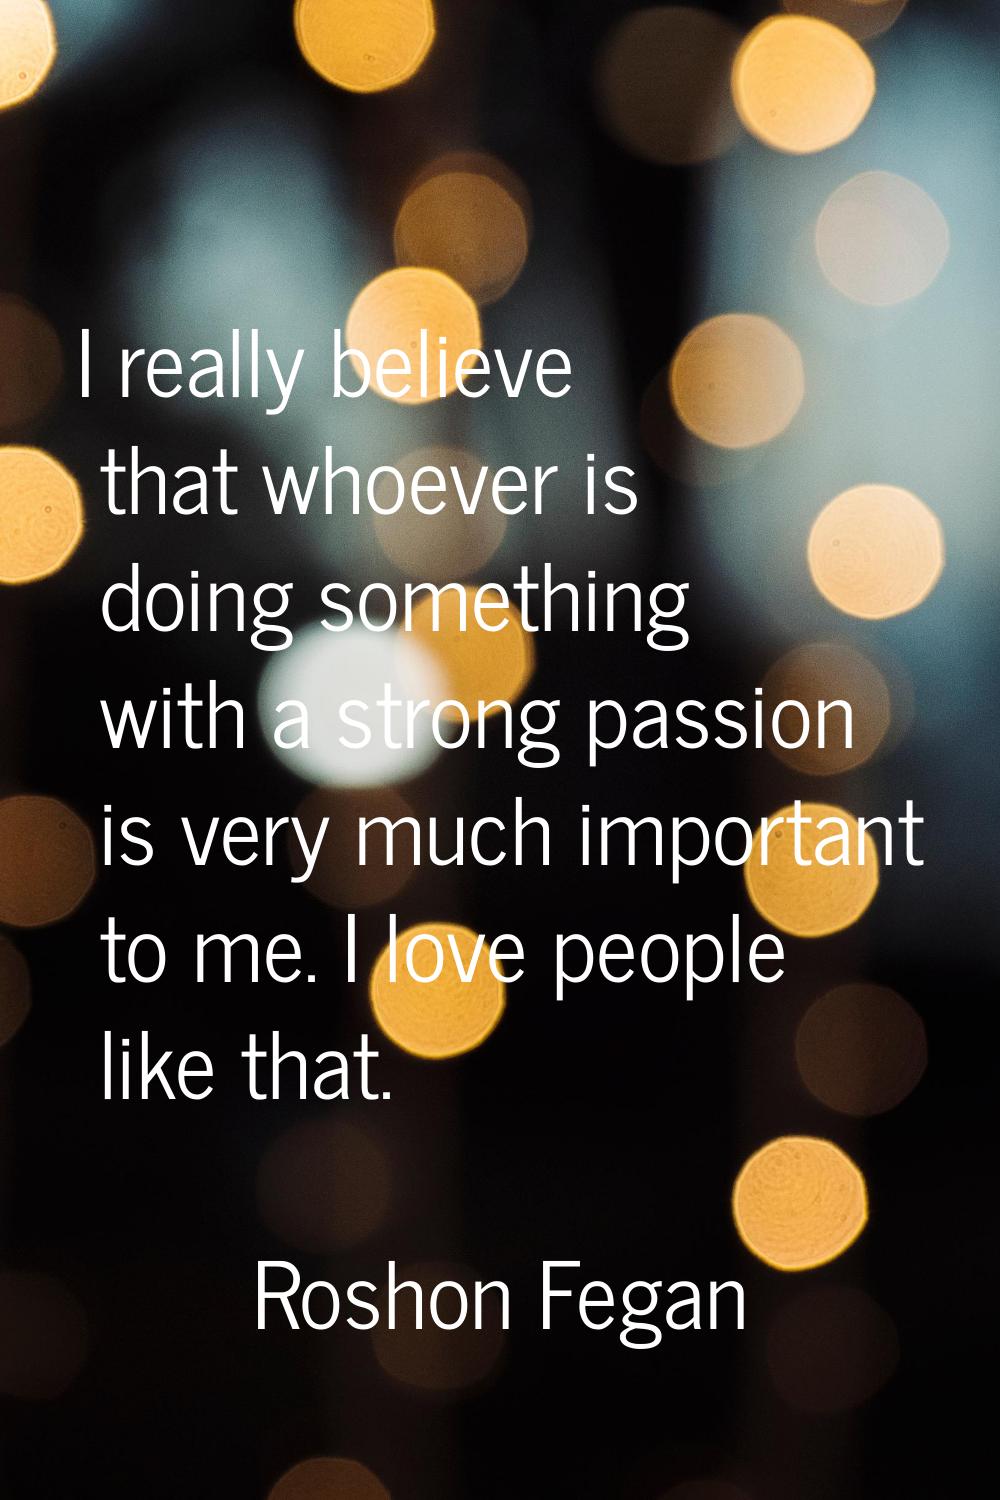 I really believe that whoever is doing something with a strong passion is very much important to me